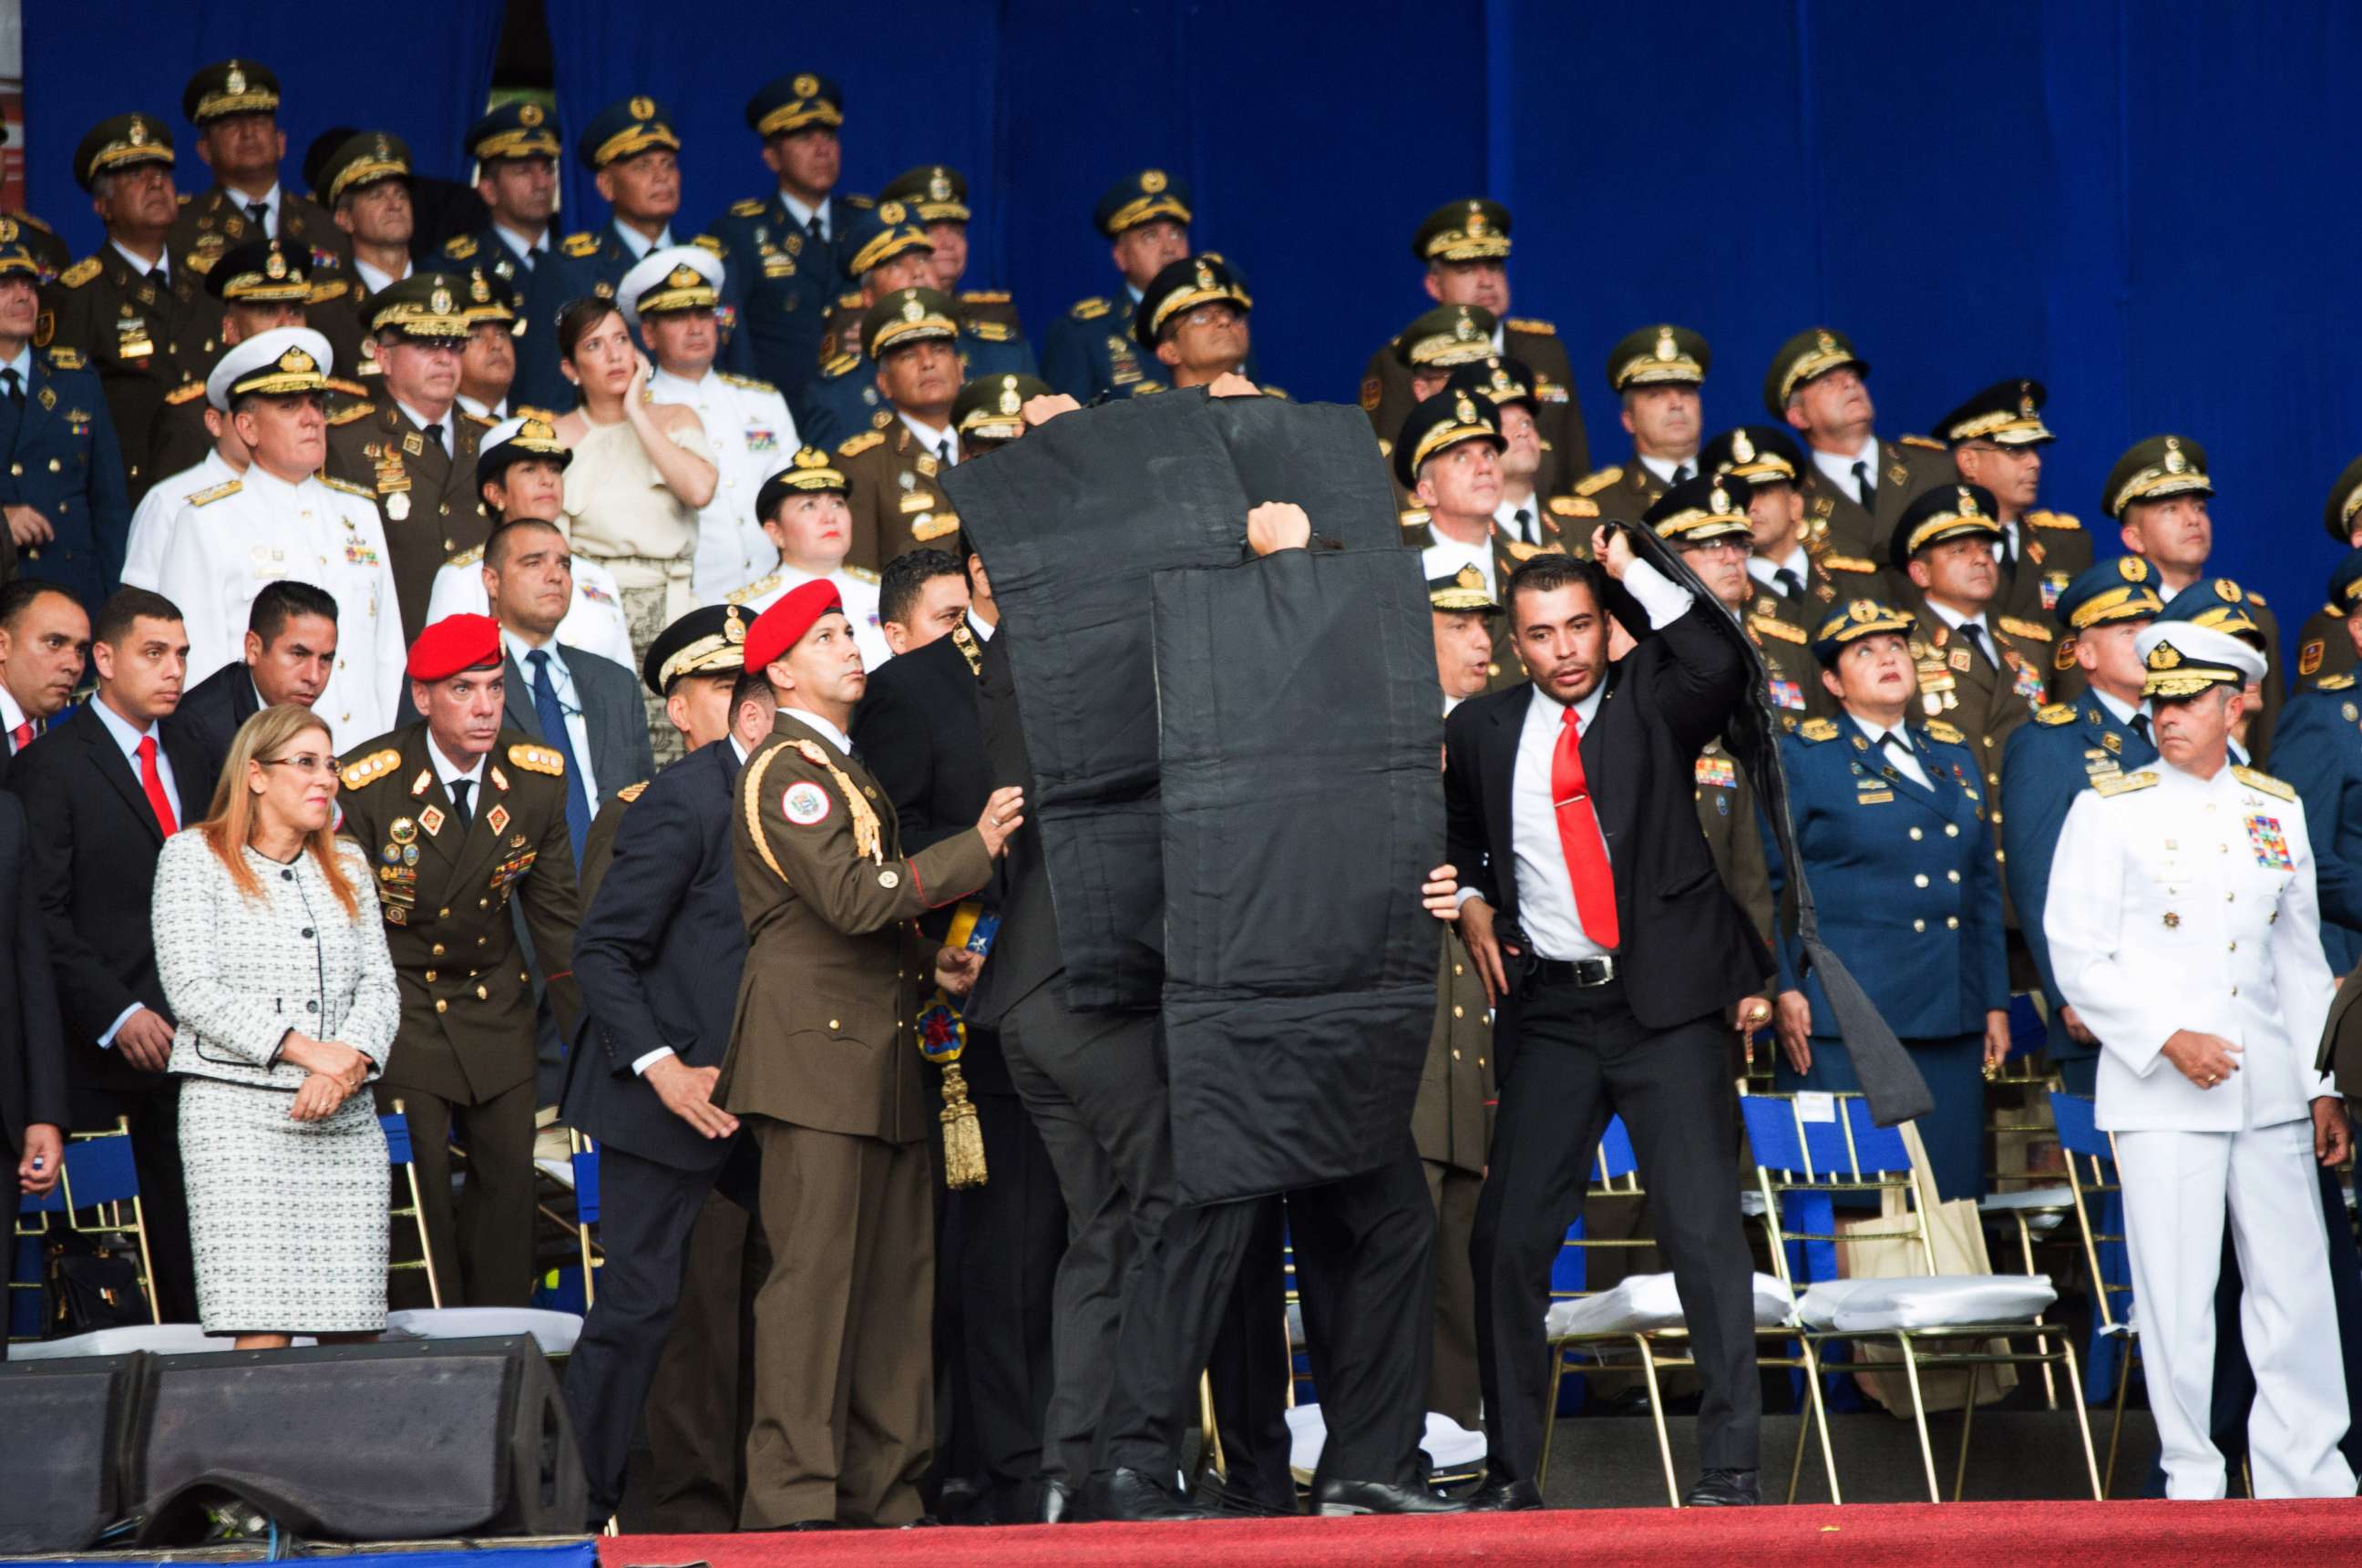 PHOTO: Security members surround and protect Venezuelan President Nicolas Maduro after his speech was interrupted in Caracas, Venezuela, on Aug. 4, 2018.